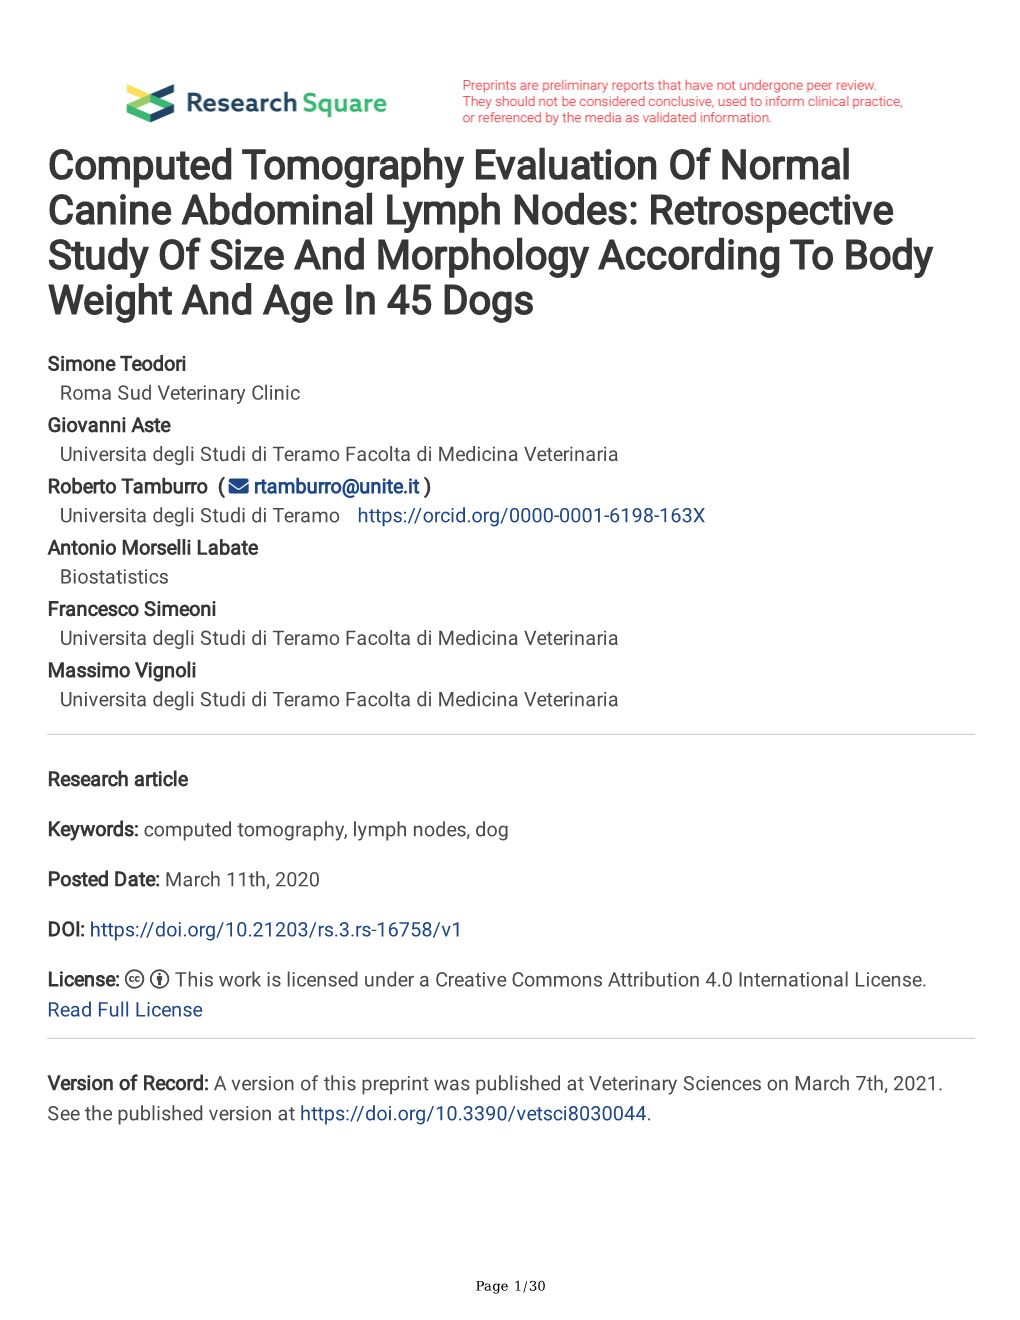 Computed Tomography Evaluation of Normal Canine Abdominal Lymph Nodes: Retrospective Study of Size and Morphology According to Body Weight and Age in 45 Dogs